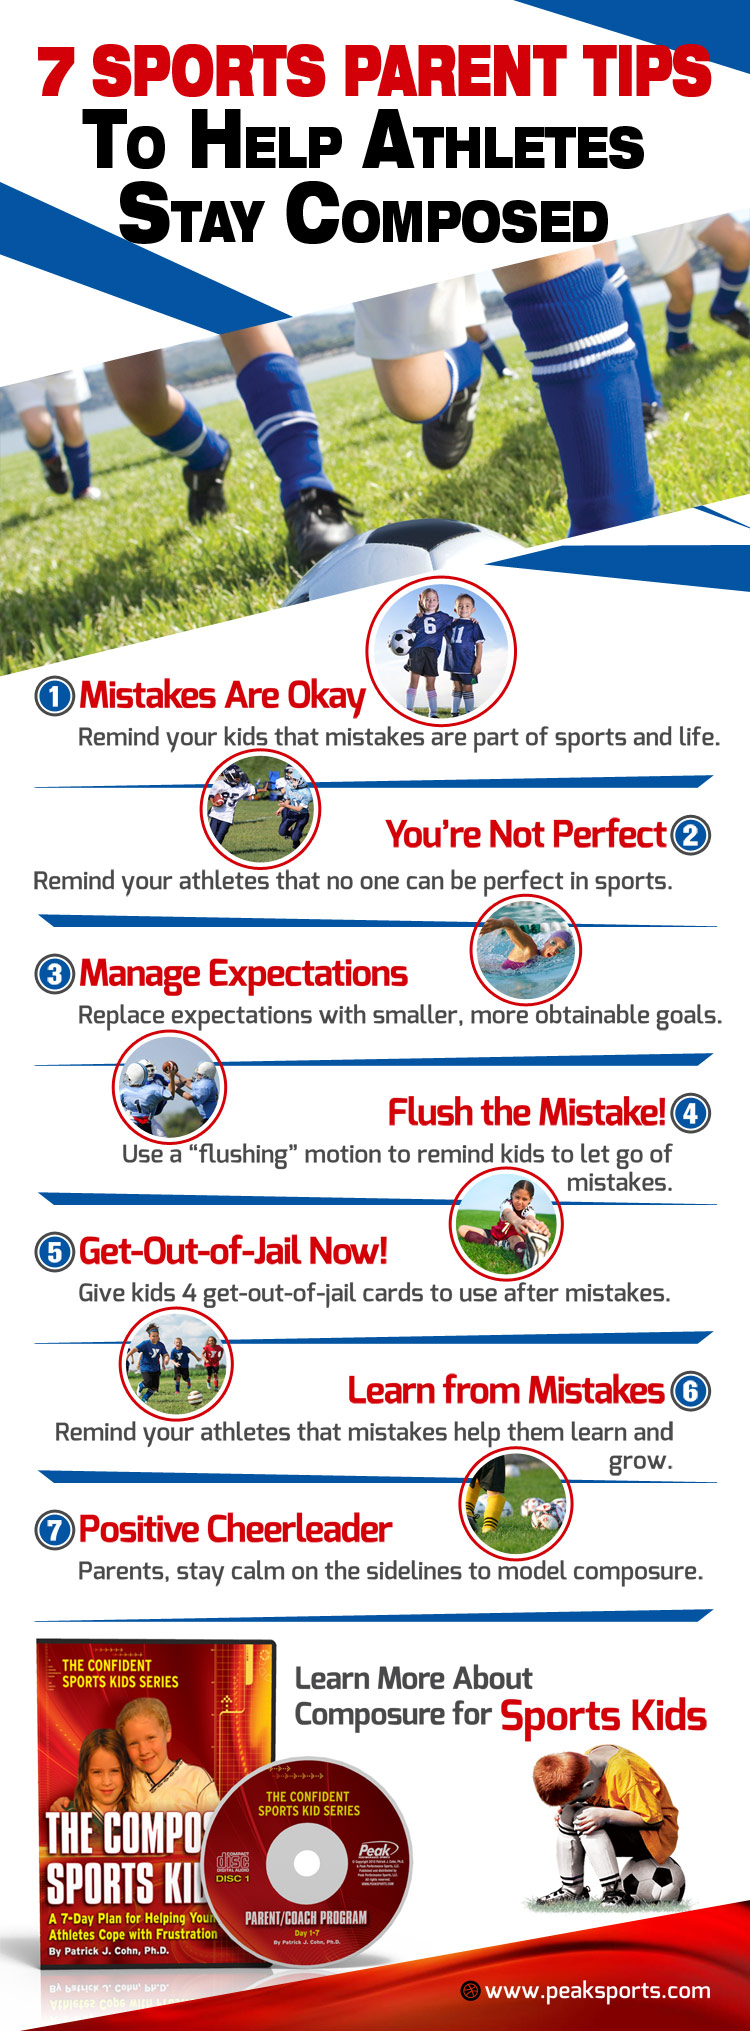 7-Sports-Parent-Tips-To-Help-Athletes-Stay-Composed-pin